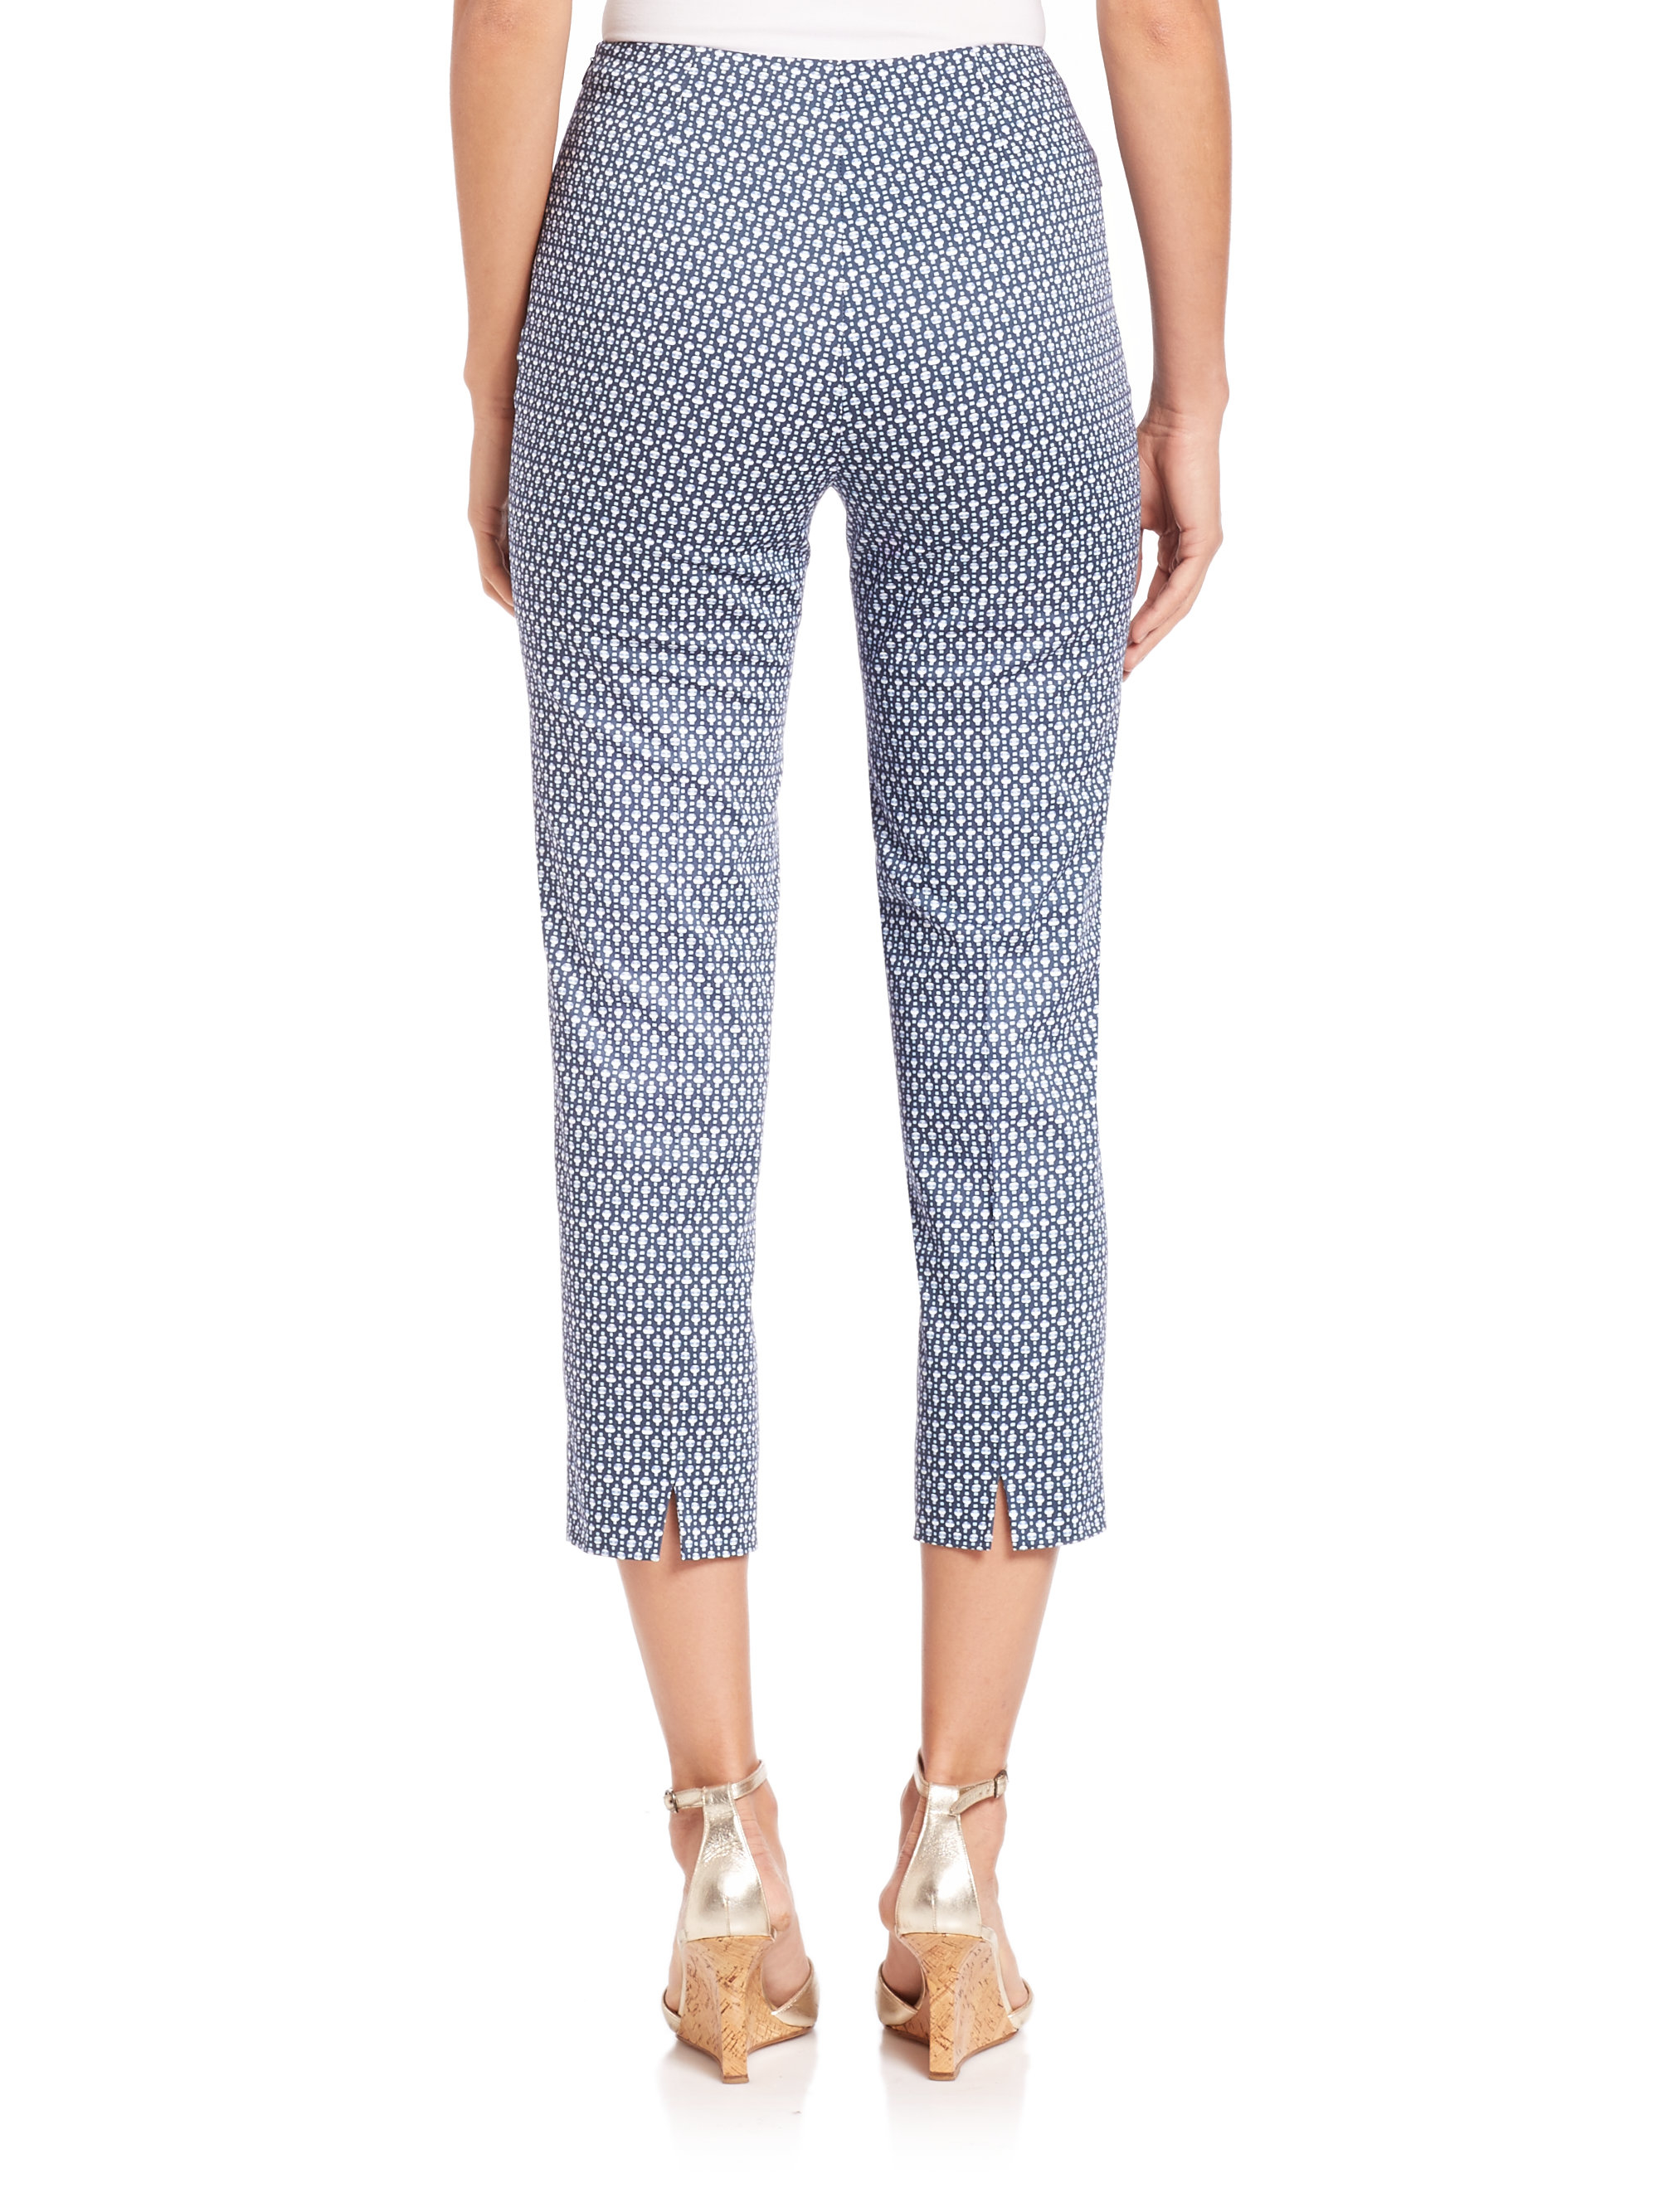 Lyst - Piazza Sempione Audrey Geometric-print Cropped Pants in Blue